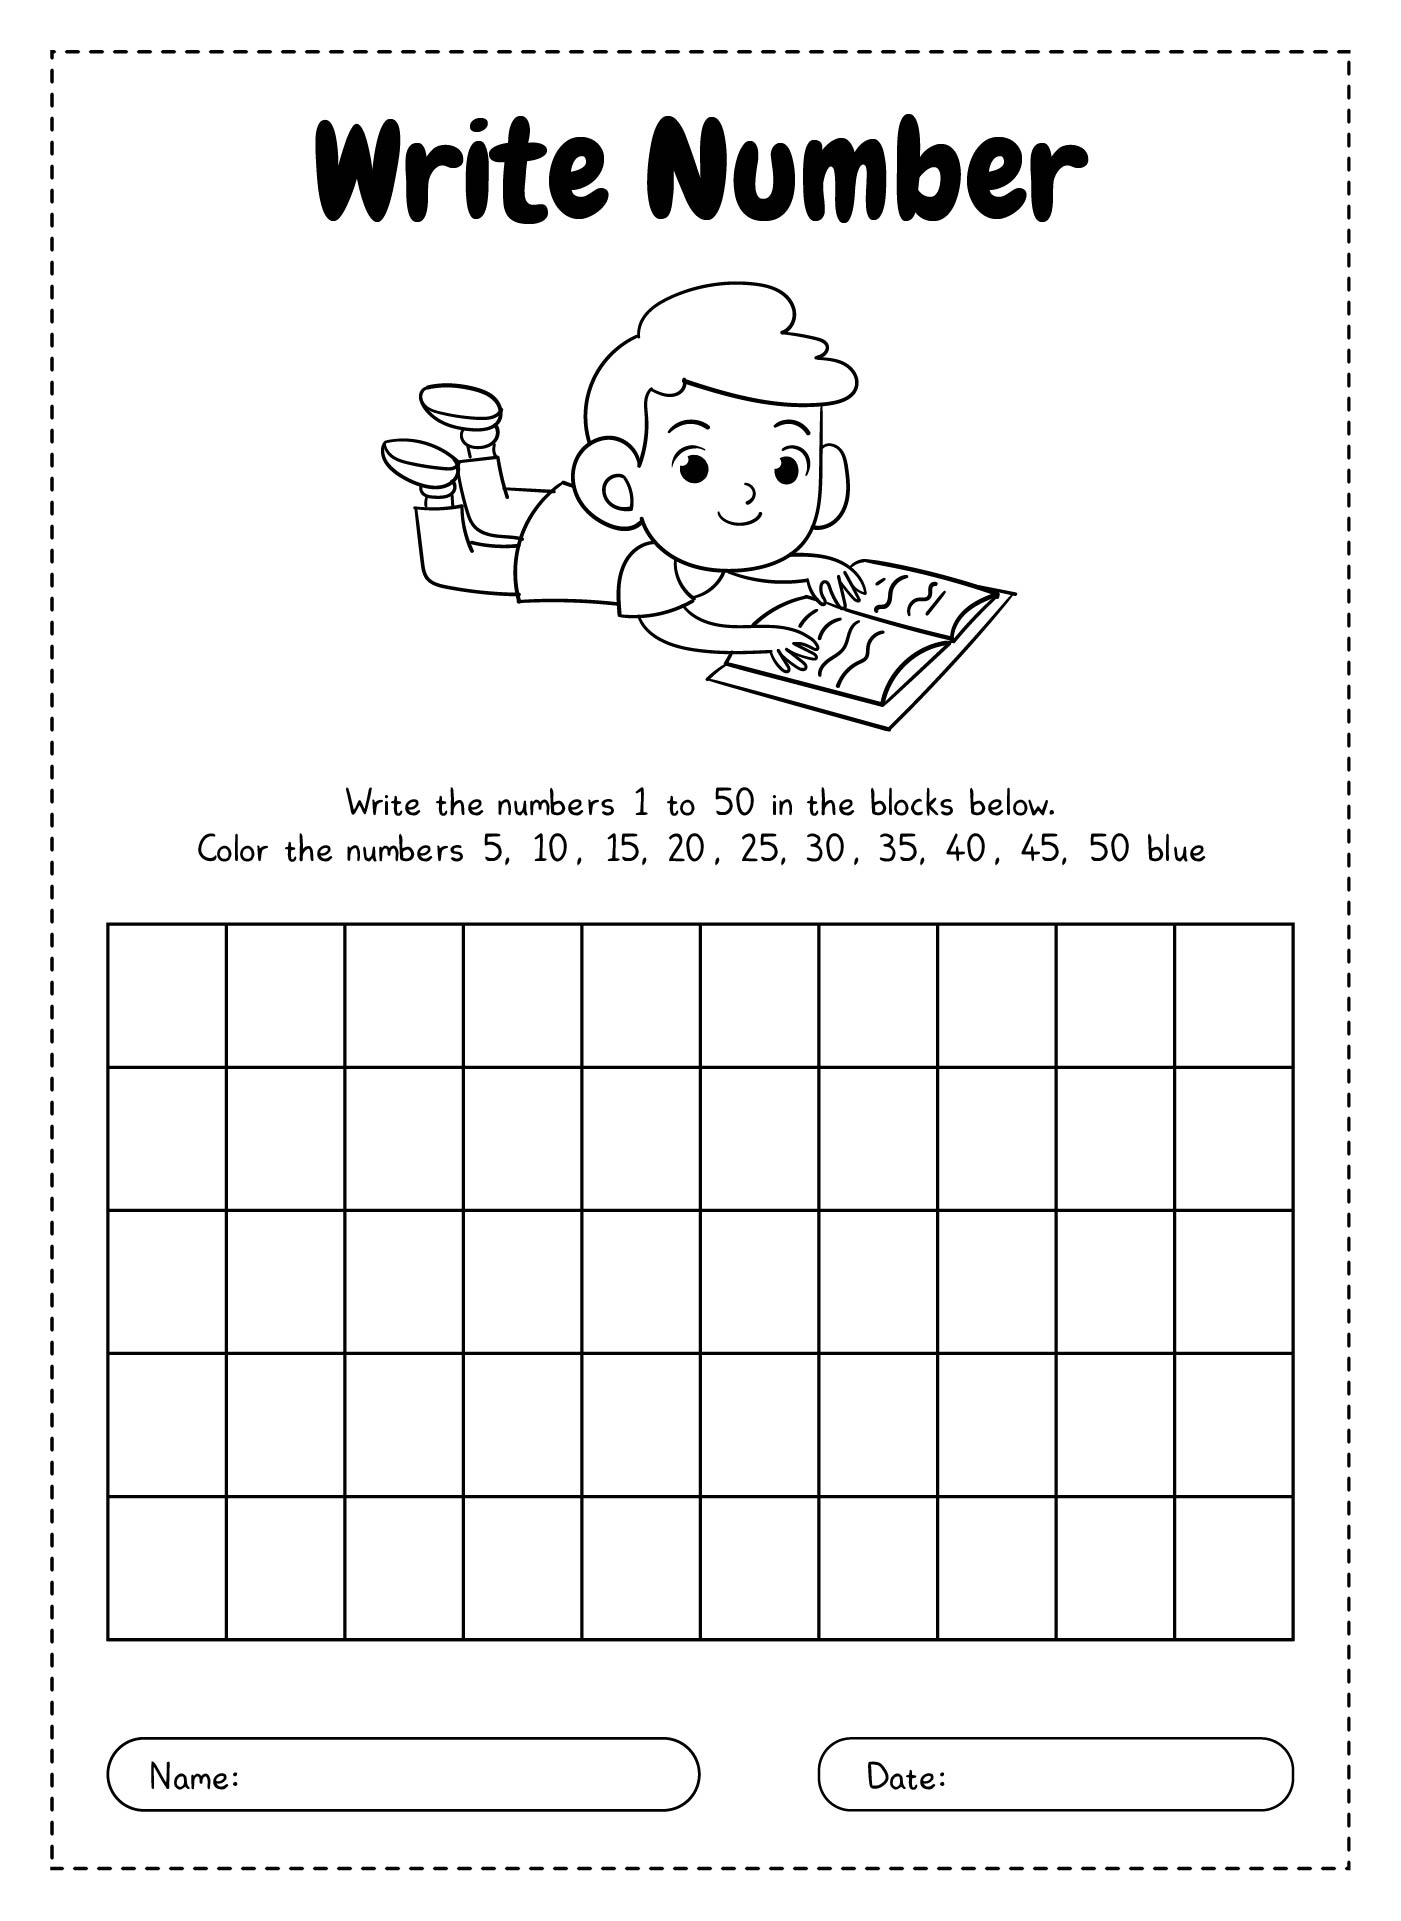 6-best-images-of-50-chart-printable-printable-number-1-50-worksheet-printable-number-chart-1